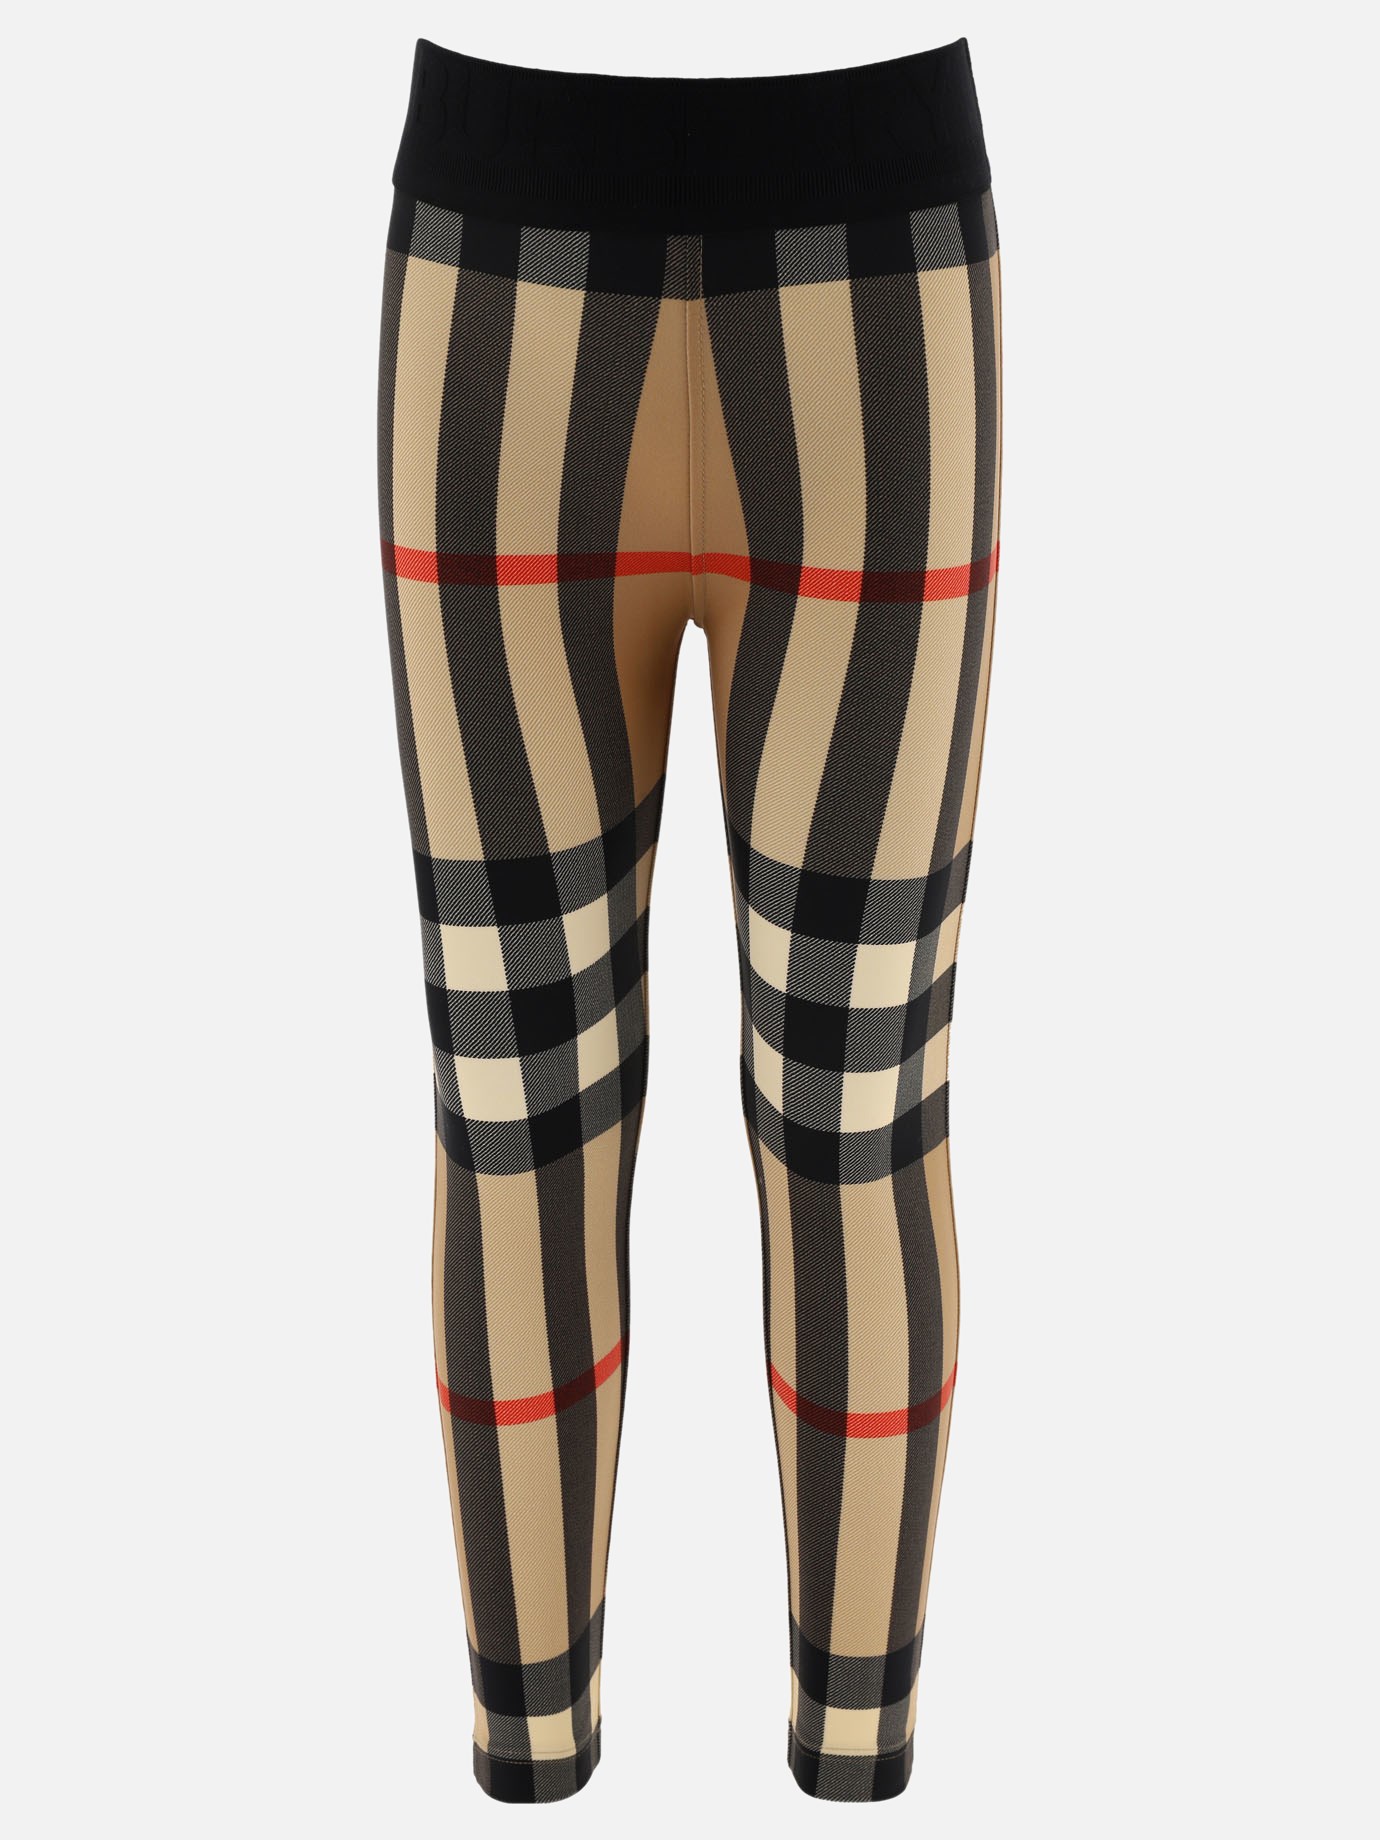  Gina  leggings by Burberry Kids